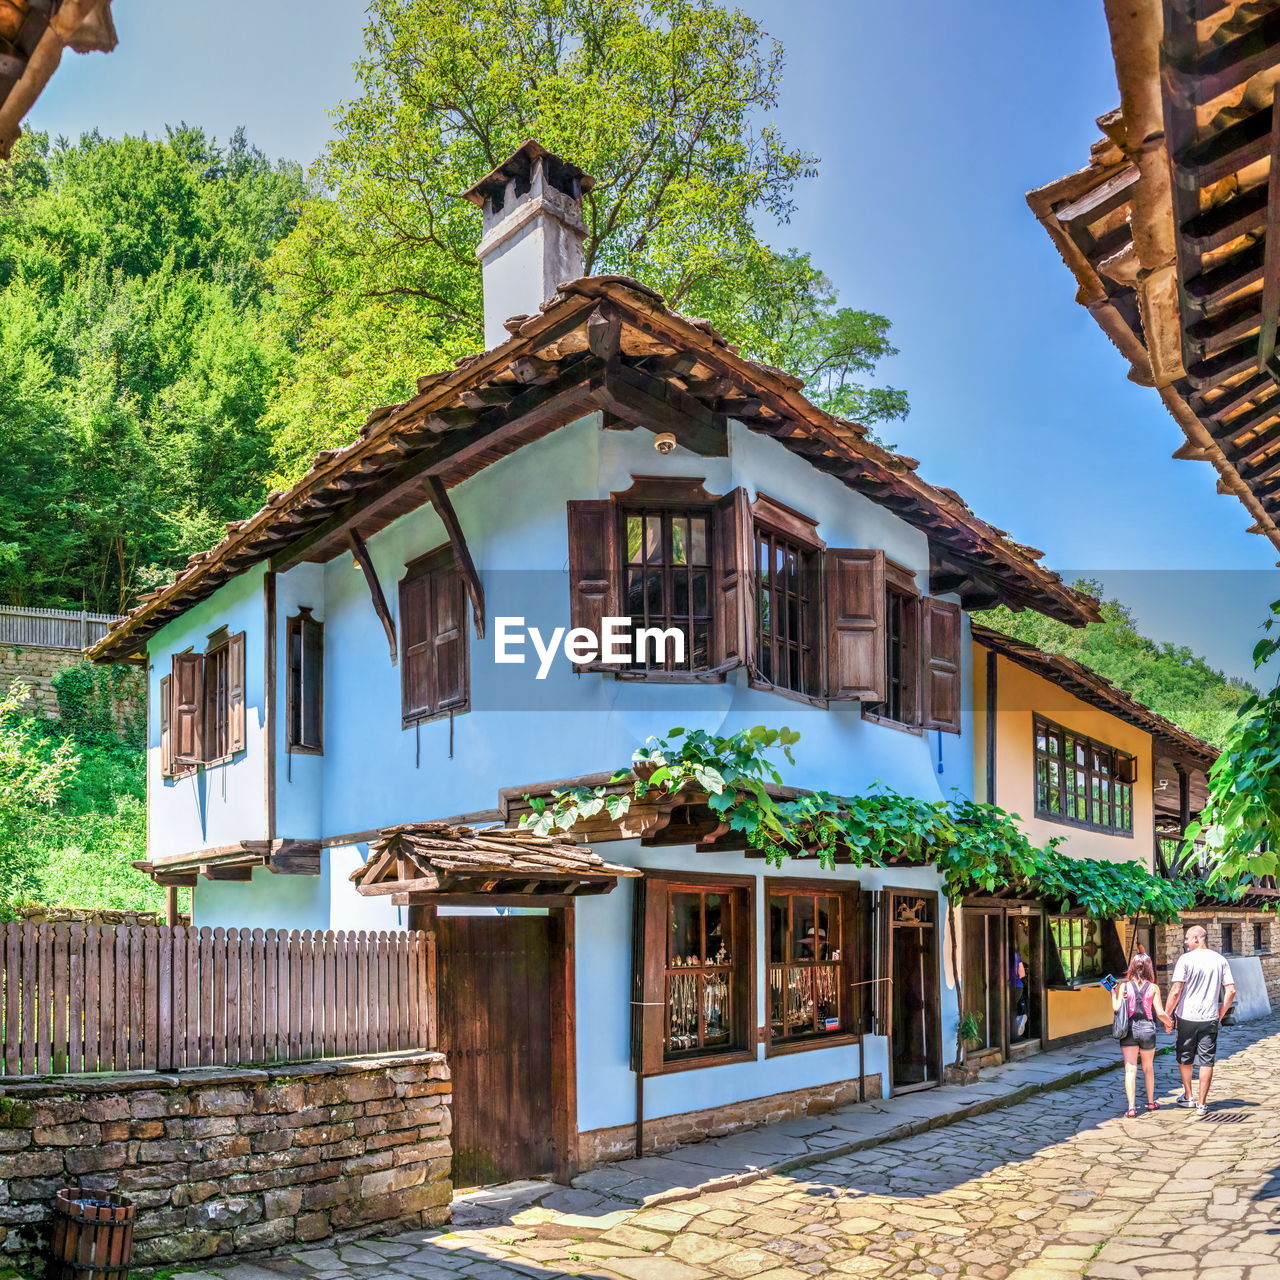 Craftsman street in the etar architectural ethnographic complex in bulgaria on a sunny summer day